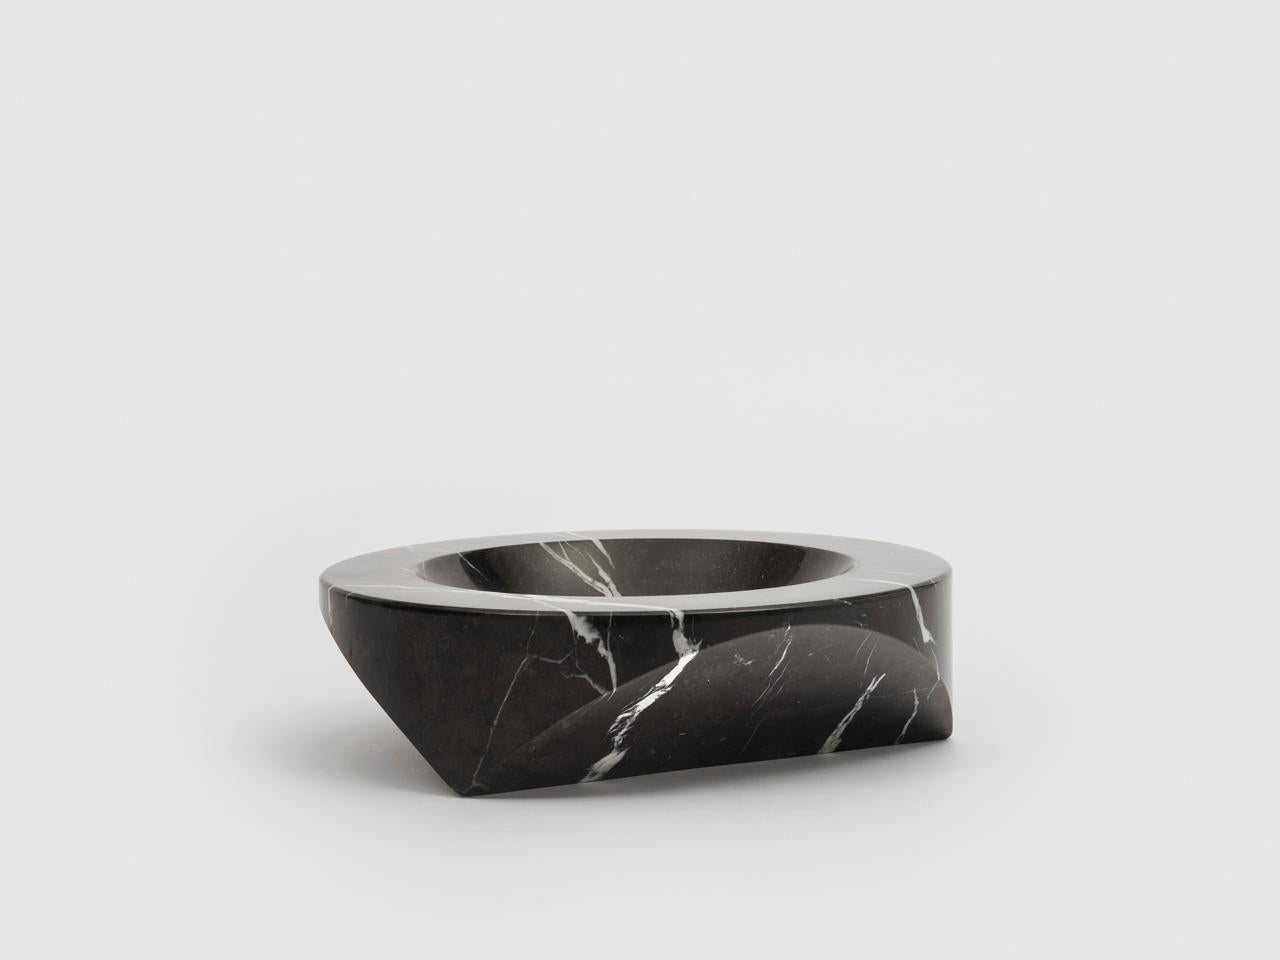 Paros D1 is an ashtray that can also be used as a table centrepiece. It is made from a section of a simple cylinder of semi-finished black Marquina marble and is produced in a limited edition of 100 pieces per year.

Enzo Mari is one of the